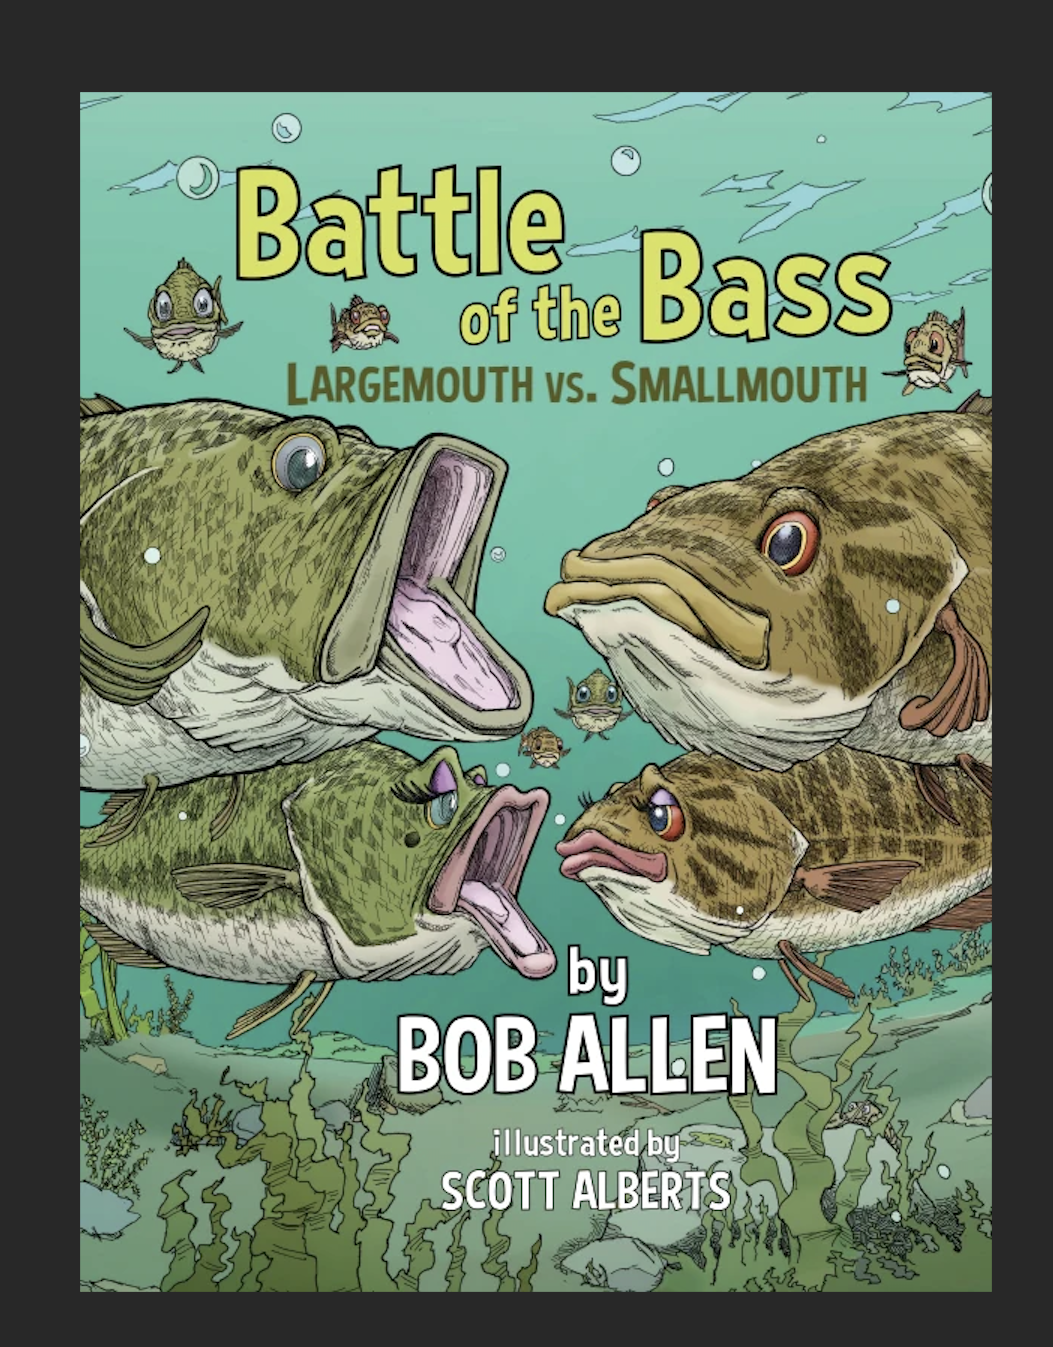 Battle of the Bass (Largemouth vs. Smallmouth) - The Local Store